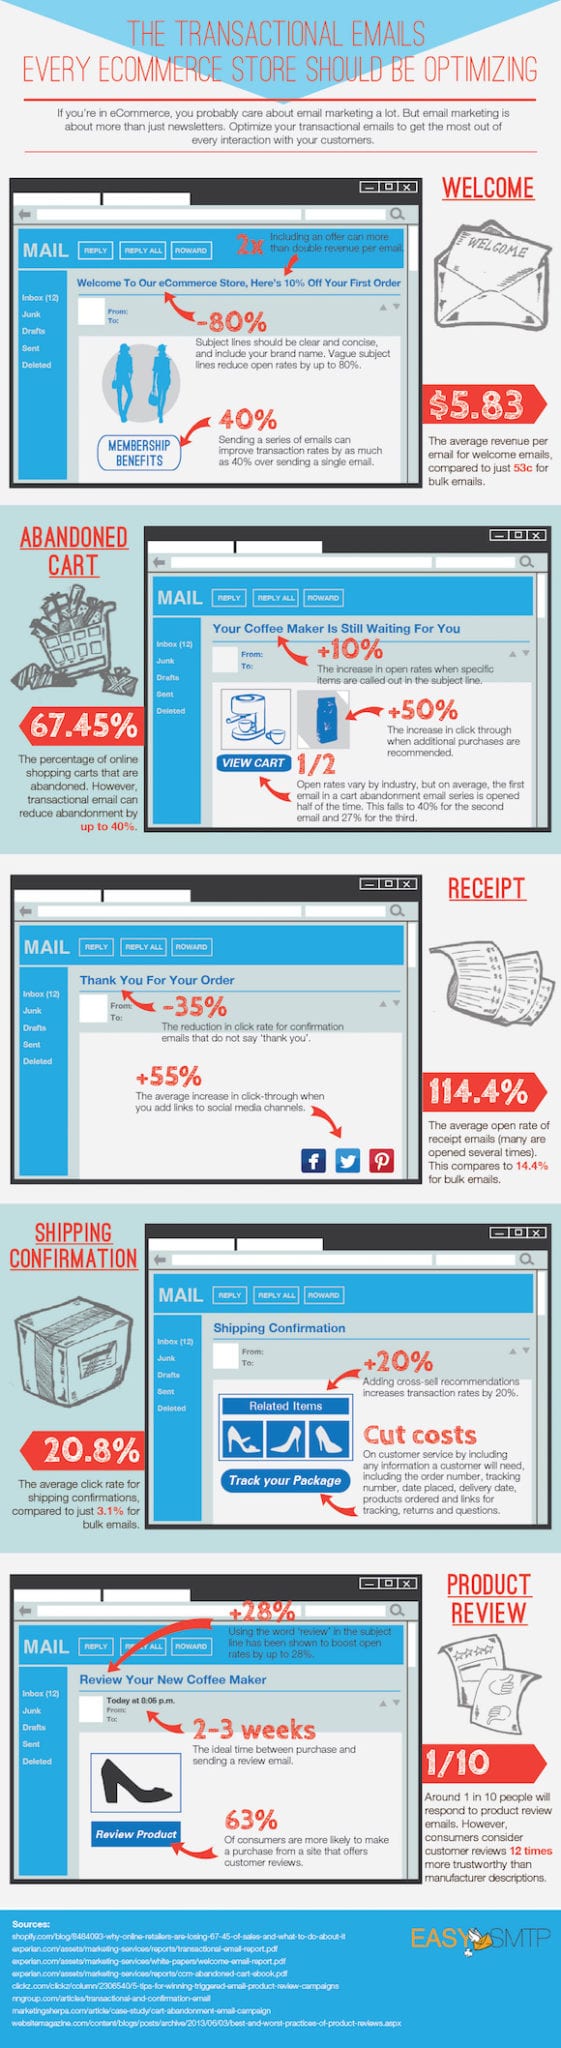 Transactional Email Tips for Ecommerce Stores [Infographic]